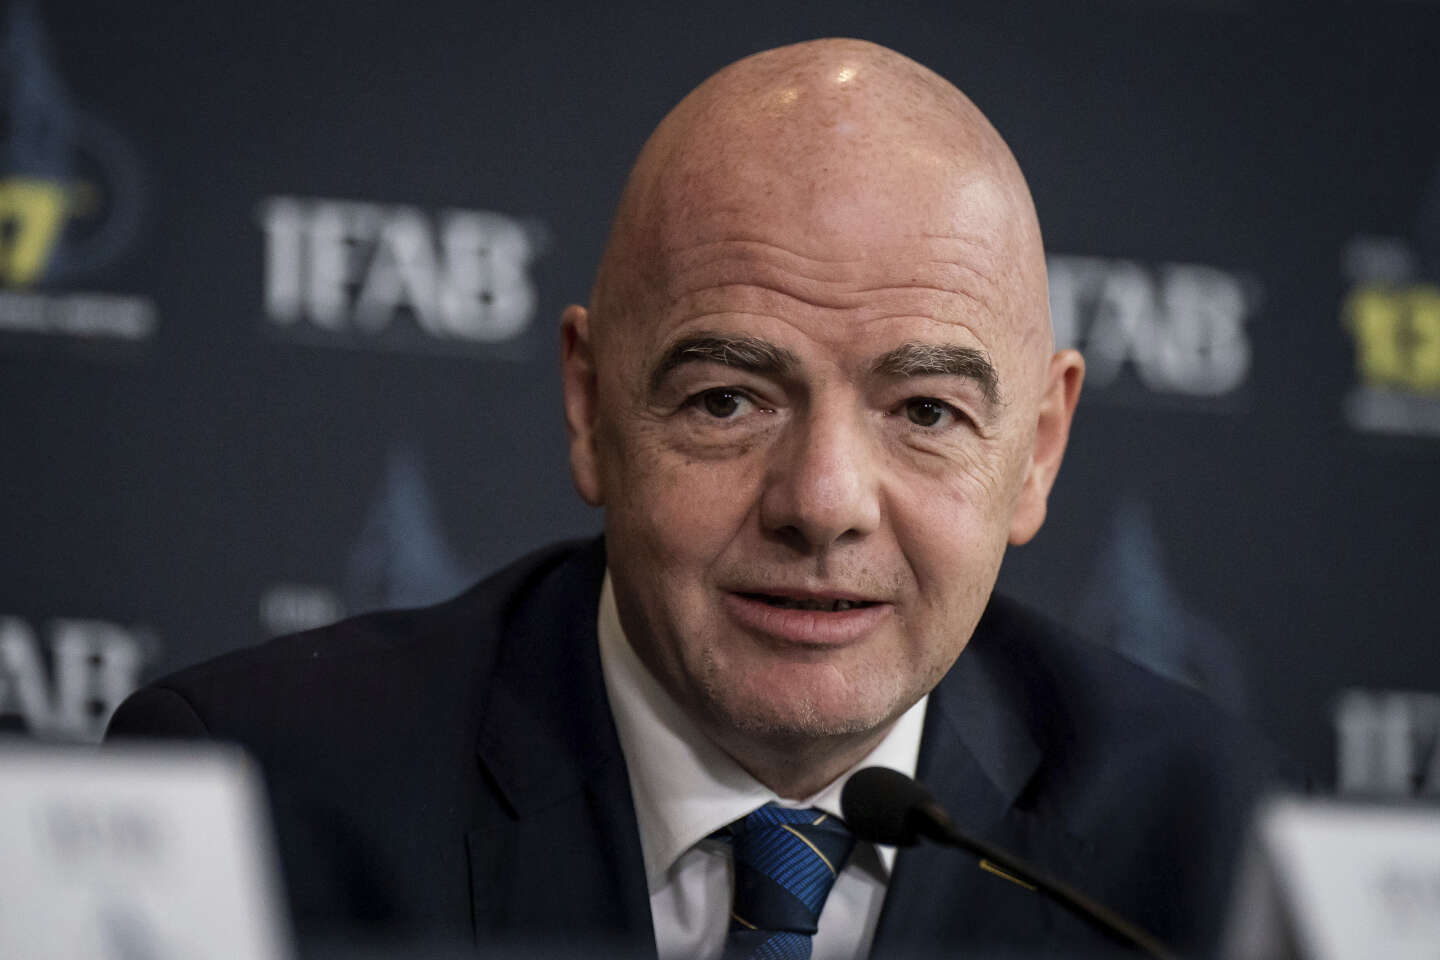 Swiss justice classifies “partial” criminal proceedings against President Gianni Infantino